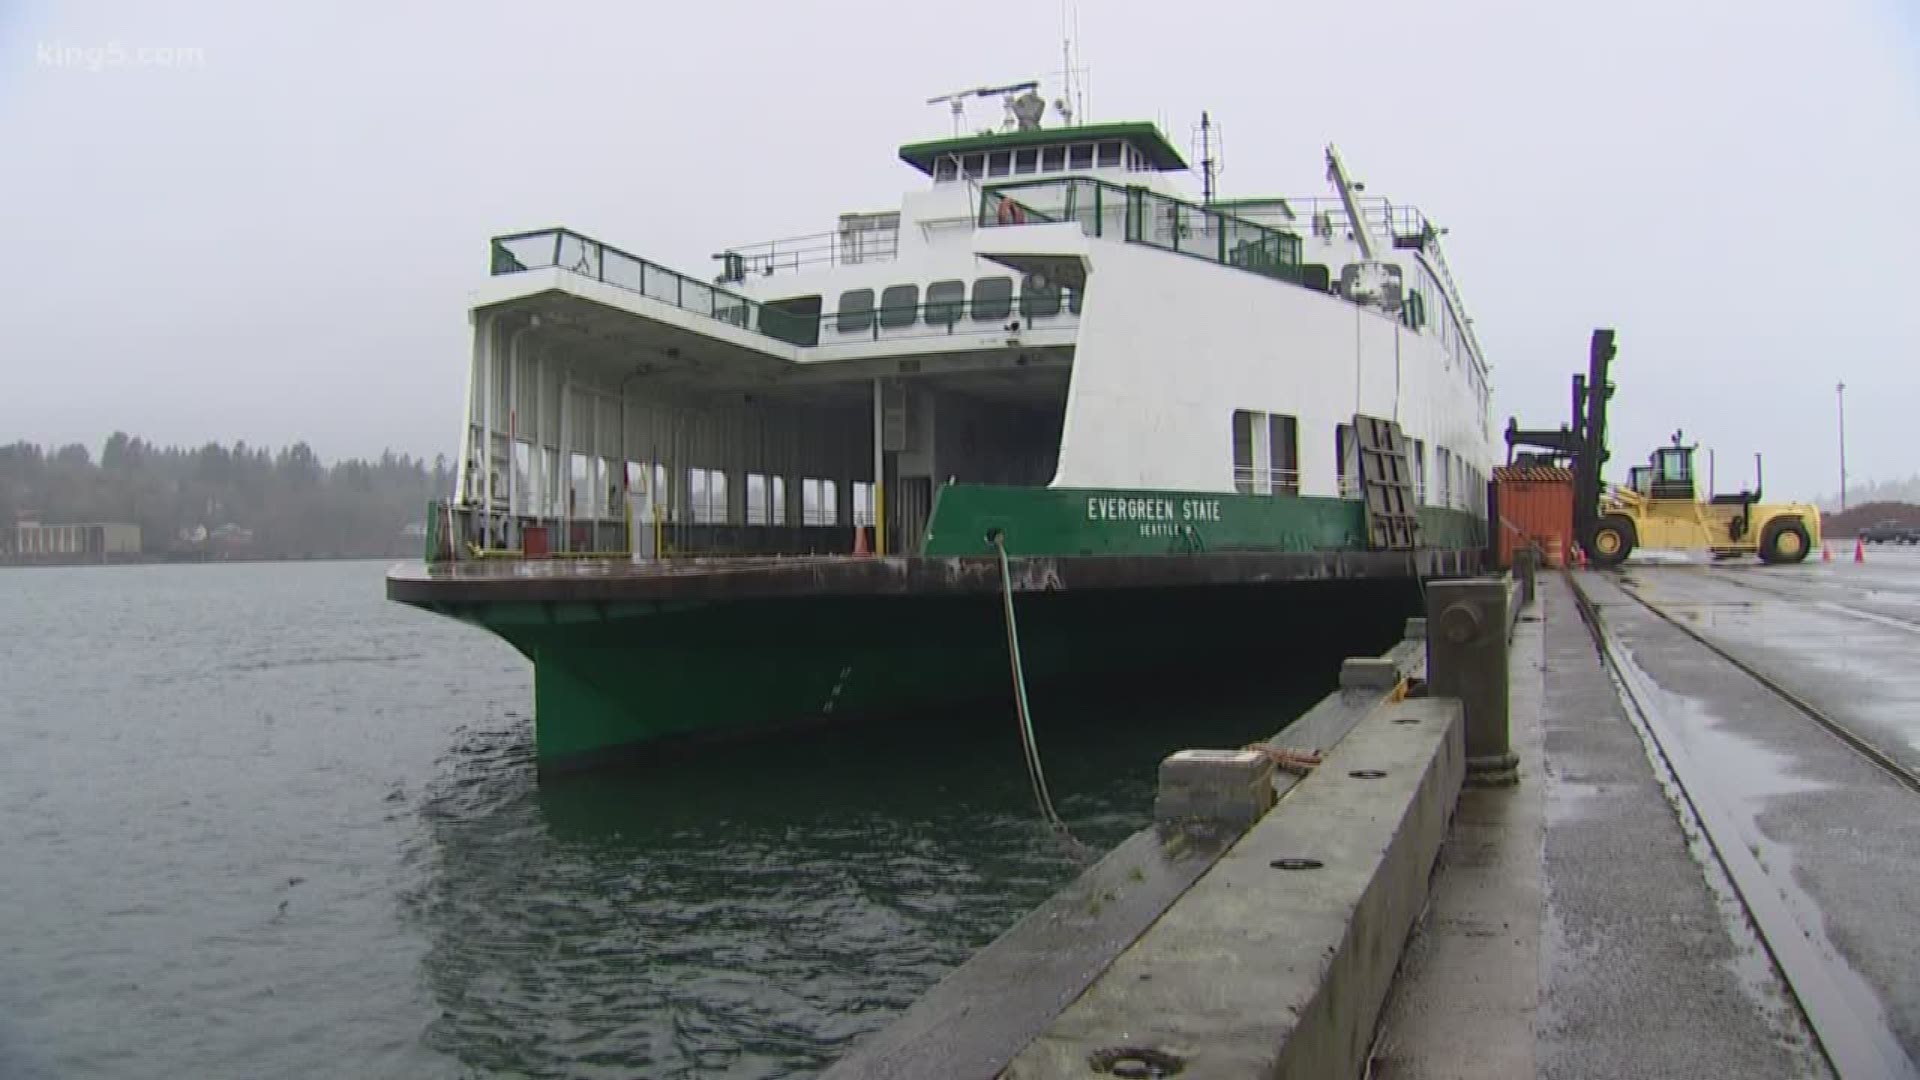 The Evergreen State ferry is up for auction by its Florida owner, who is moving on to other ventures. The boat runs great and is sea-worthy.